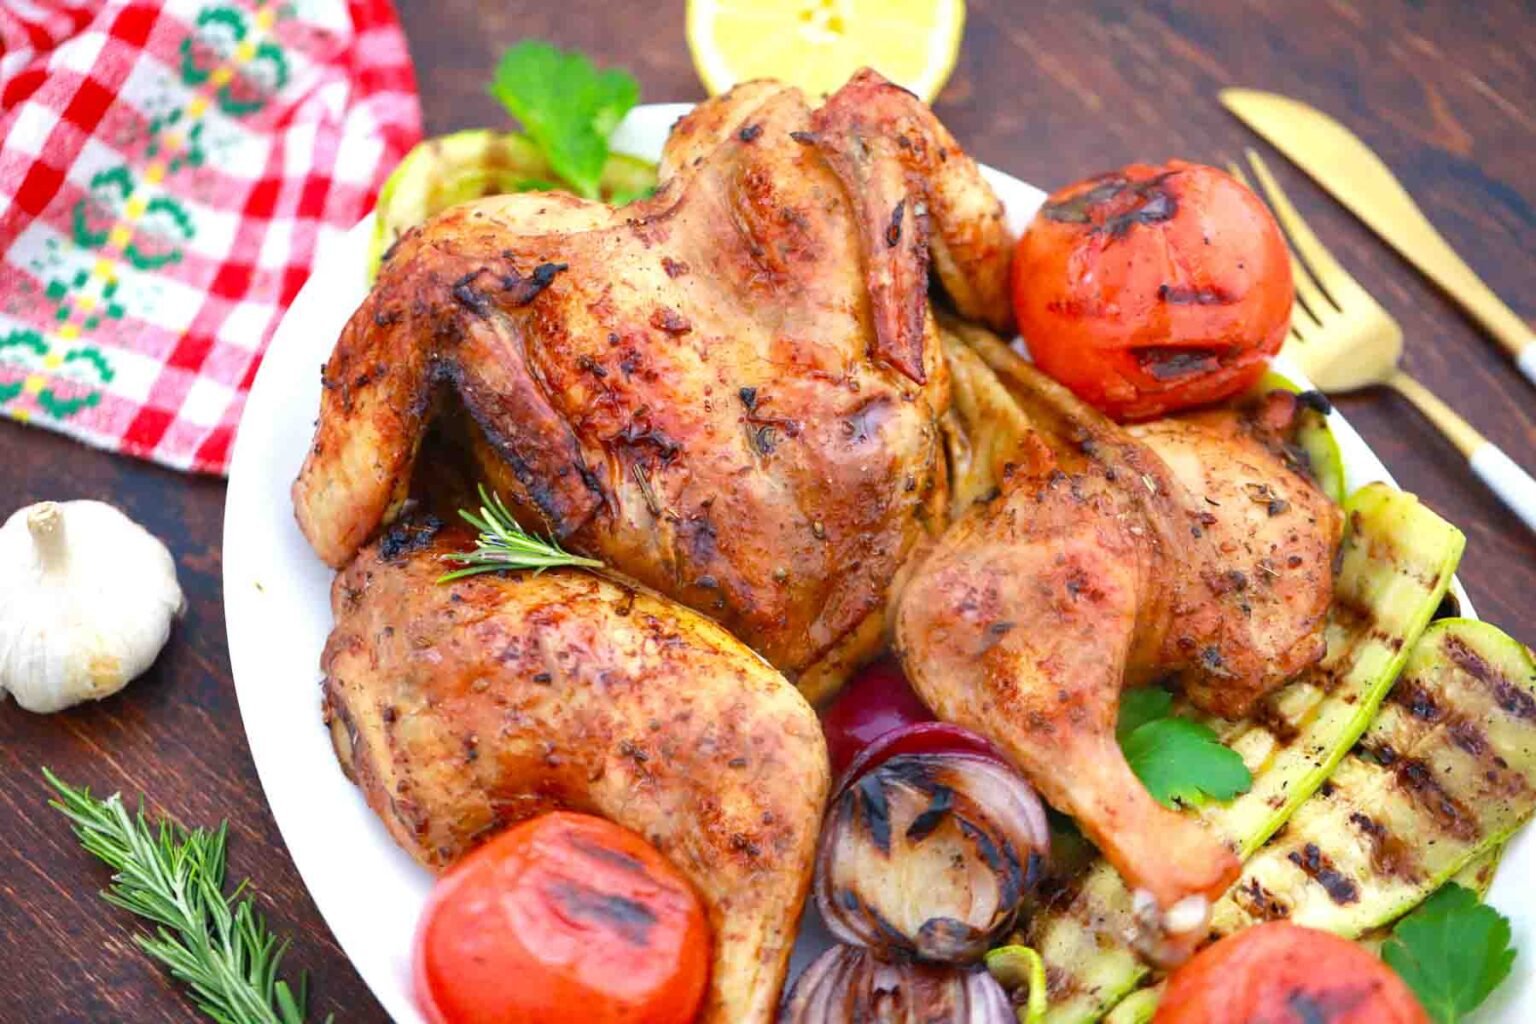 Grilled Whole Chicken Recipe [Video] - Sweet and Savory Meals